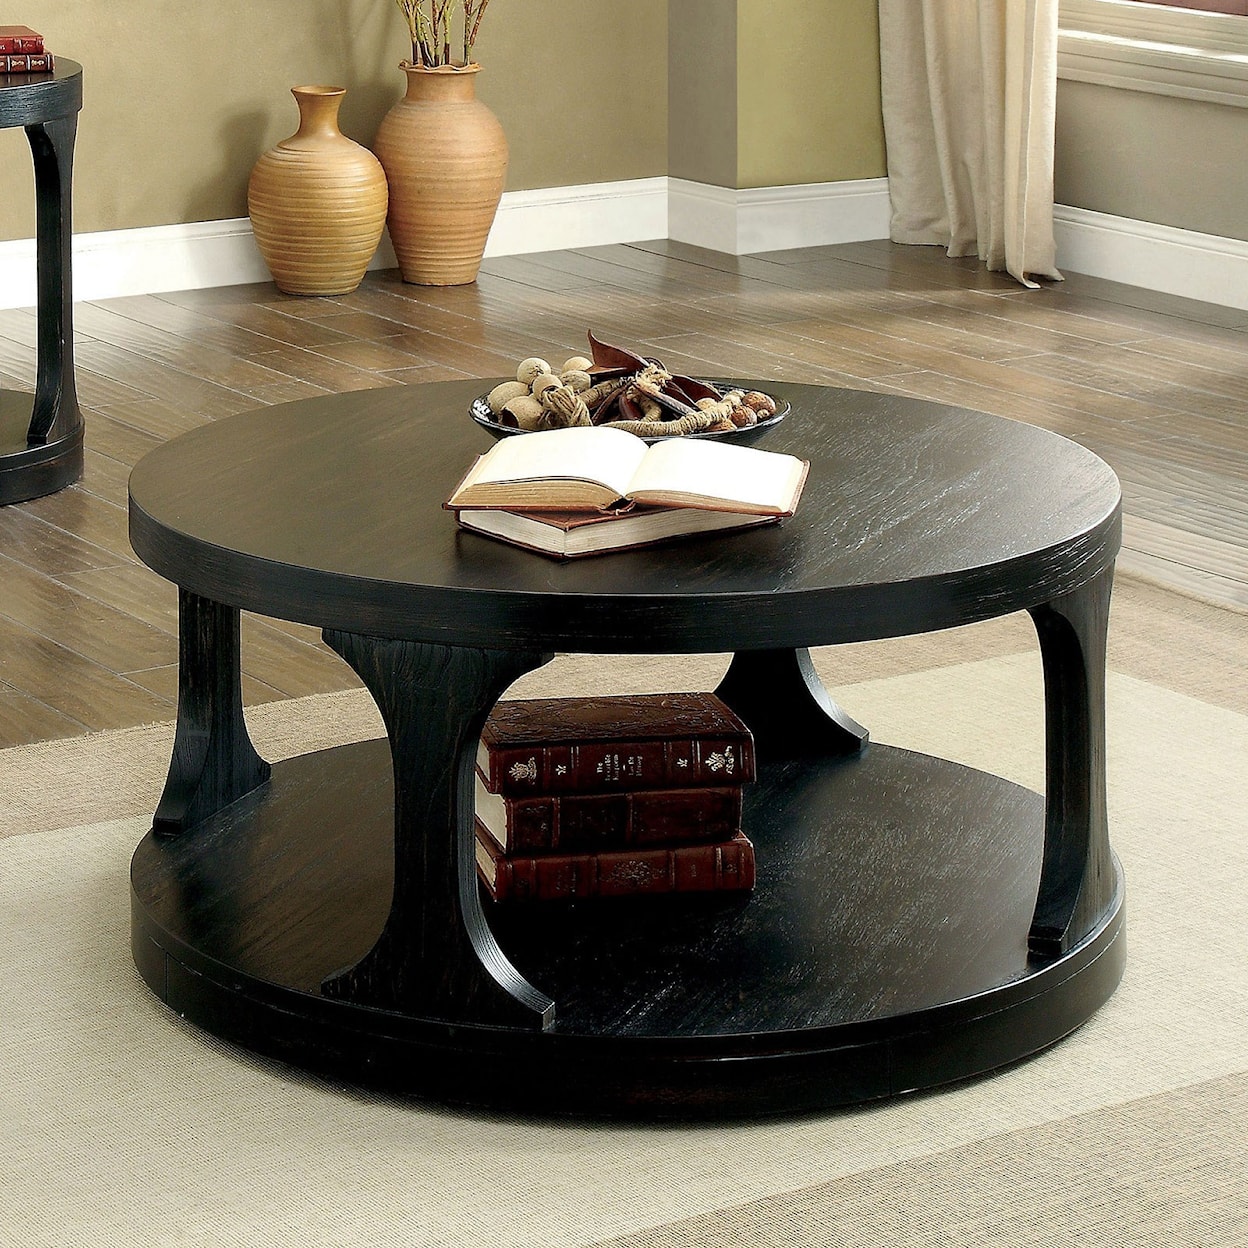 FUSA Carrie Coffee Table